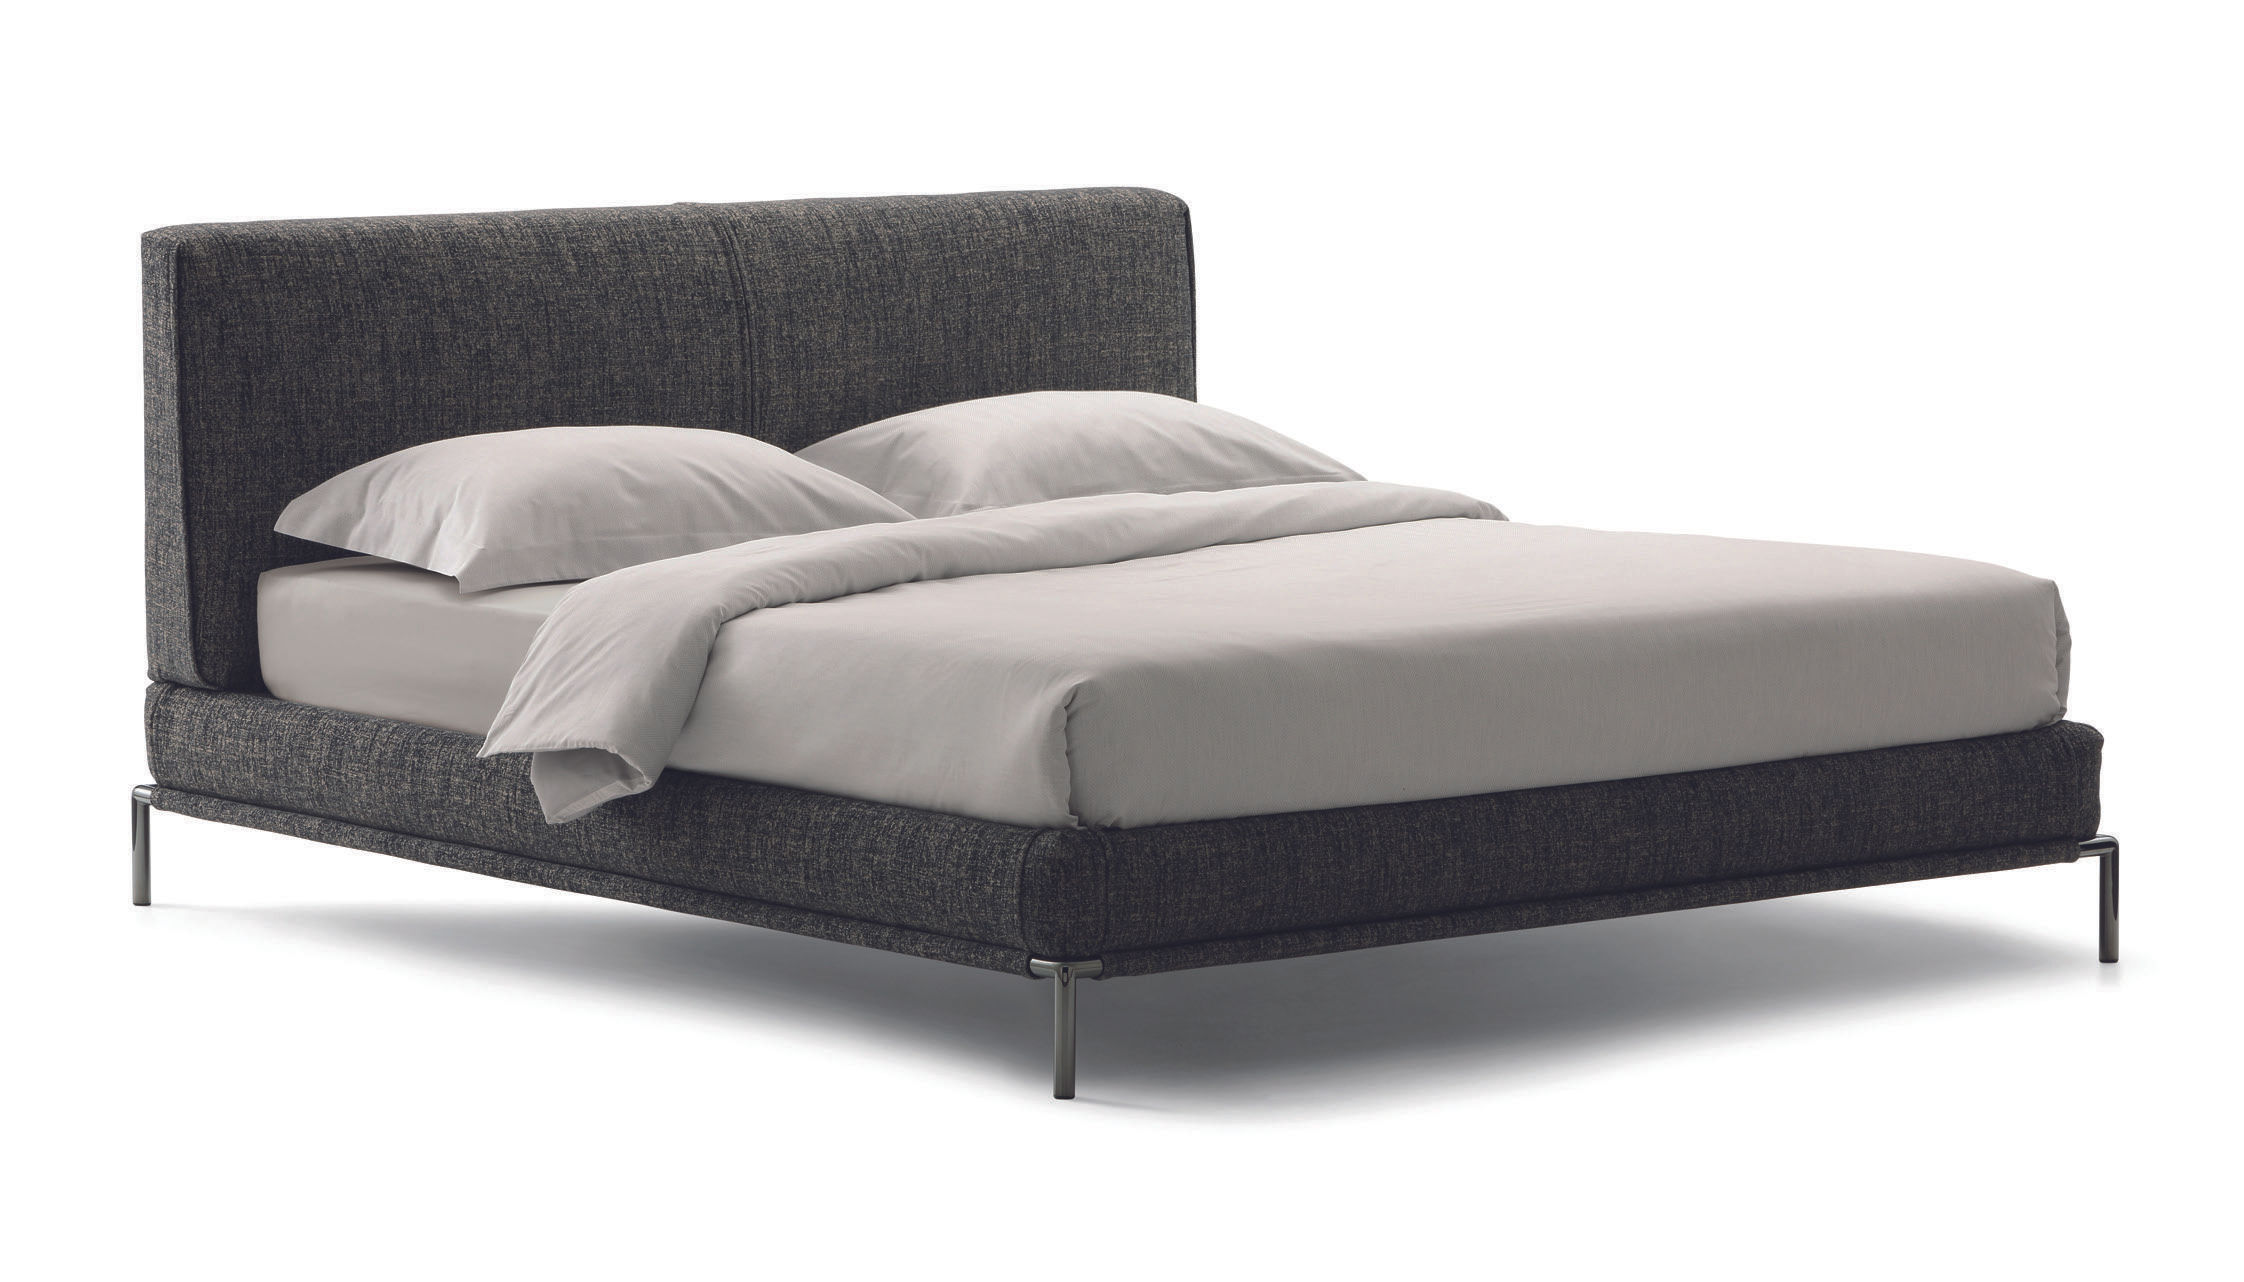 The art of furnishing: this photo shows the Icon design bed by Flou, sold by Peverelli in Como and Lugano